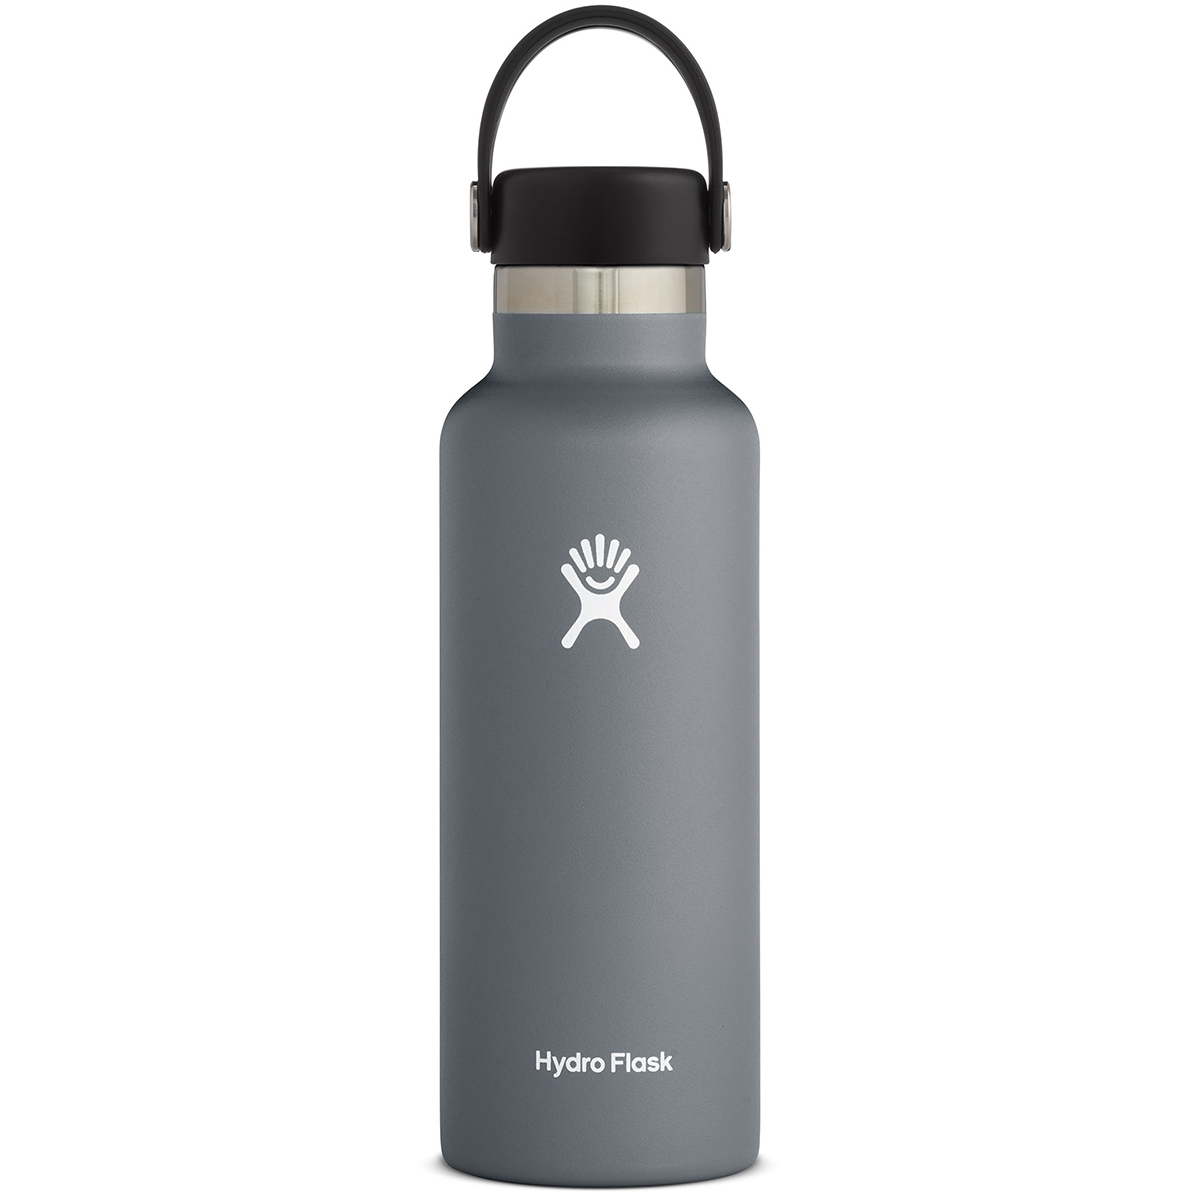 Hydro Flask 18 Oz. Standard Mouth Water Bottle With Flex Cap